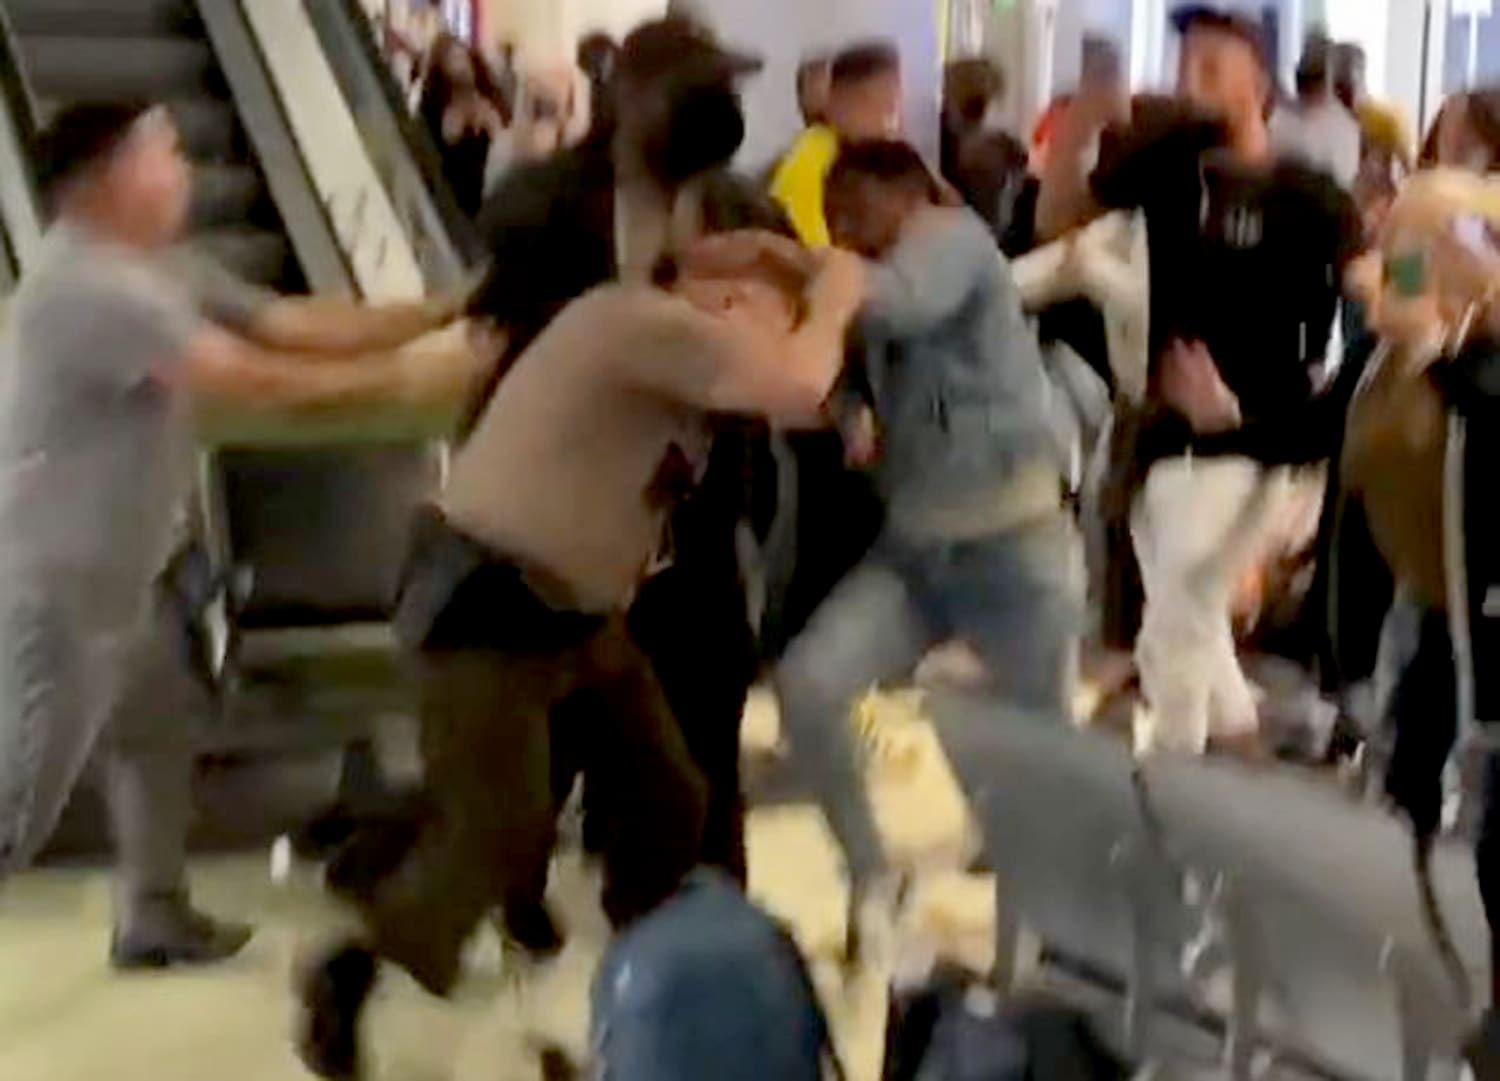 Brawl breaks out at Miami International Airport, two in custody